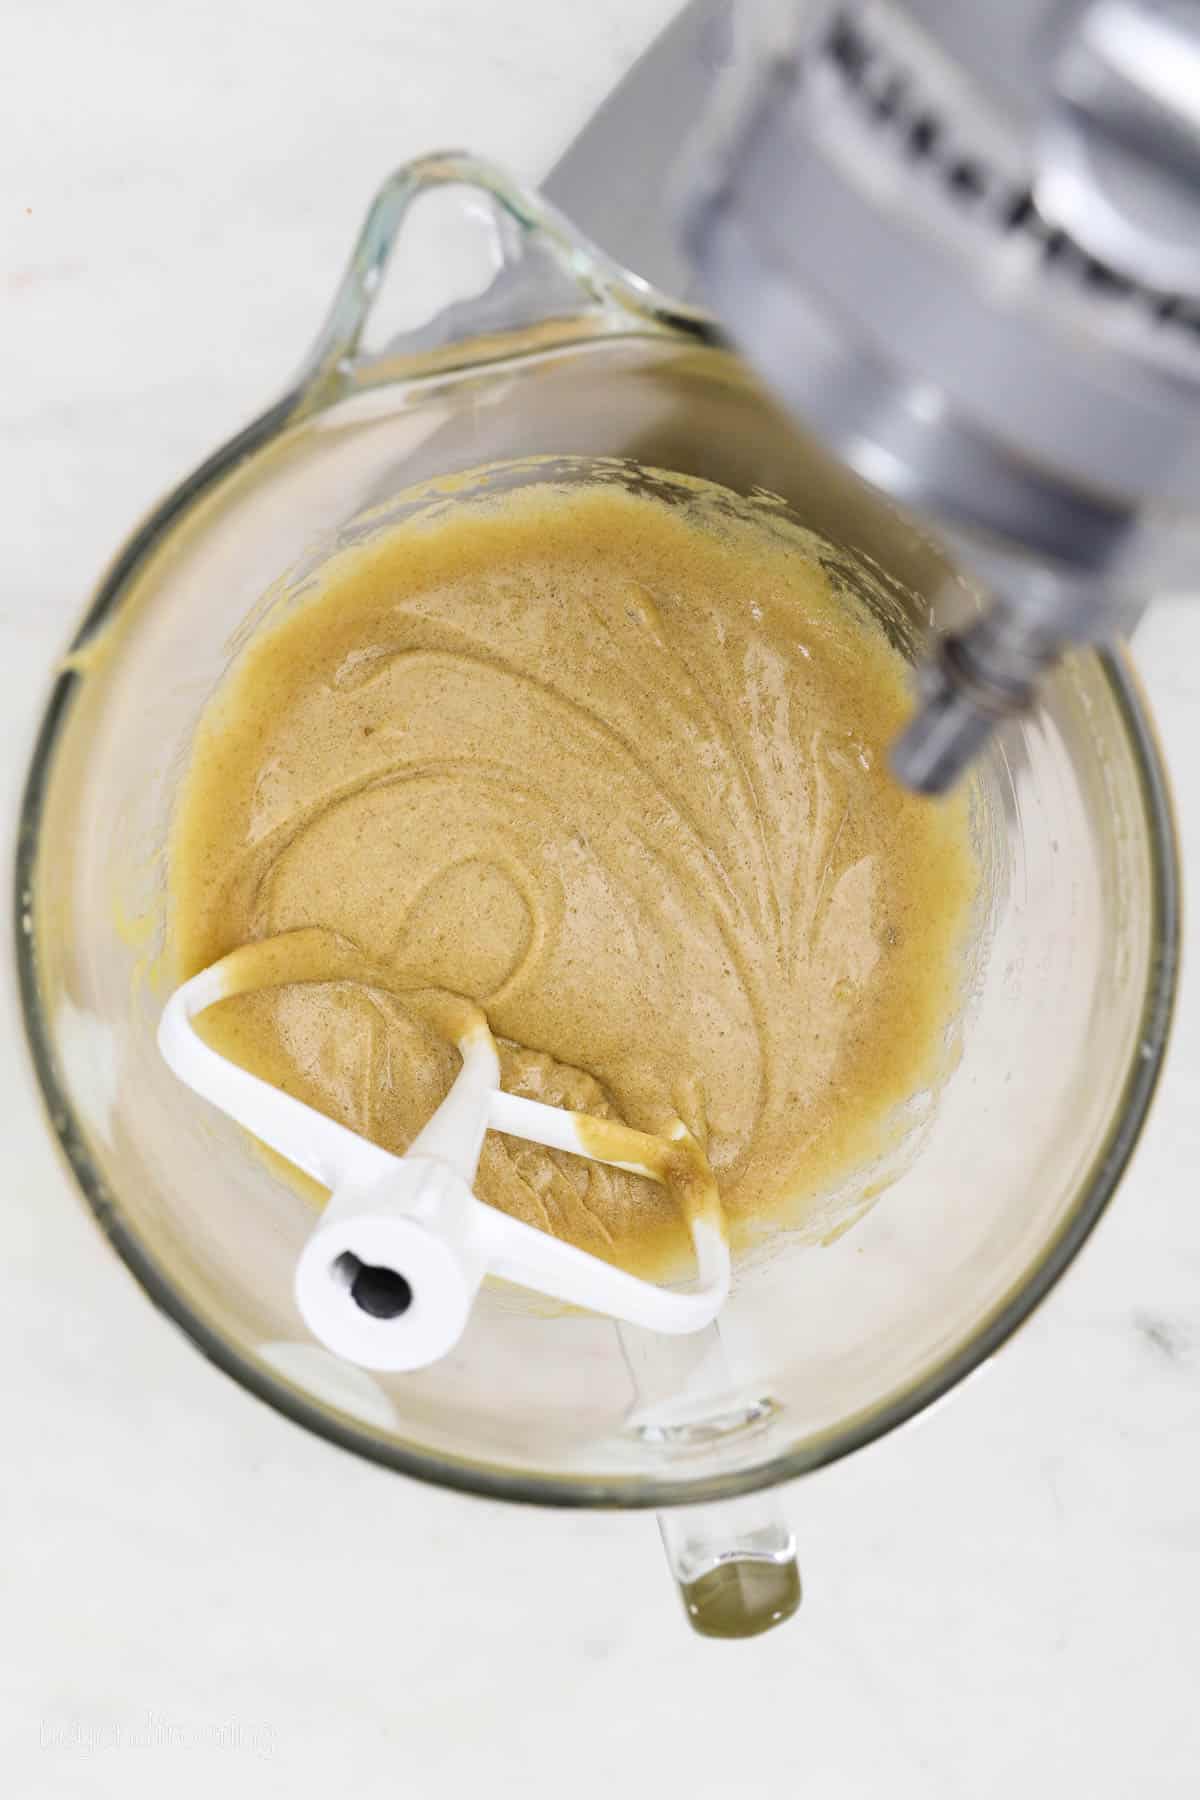 Blondie batter in a mixing bowl with a stand mixer attachment.